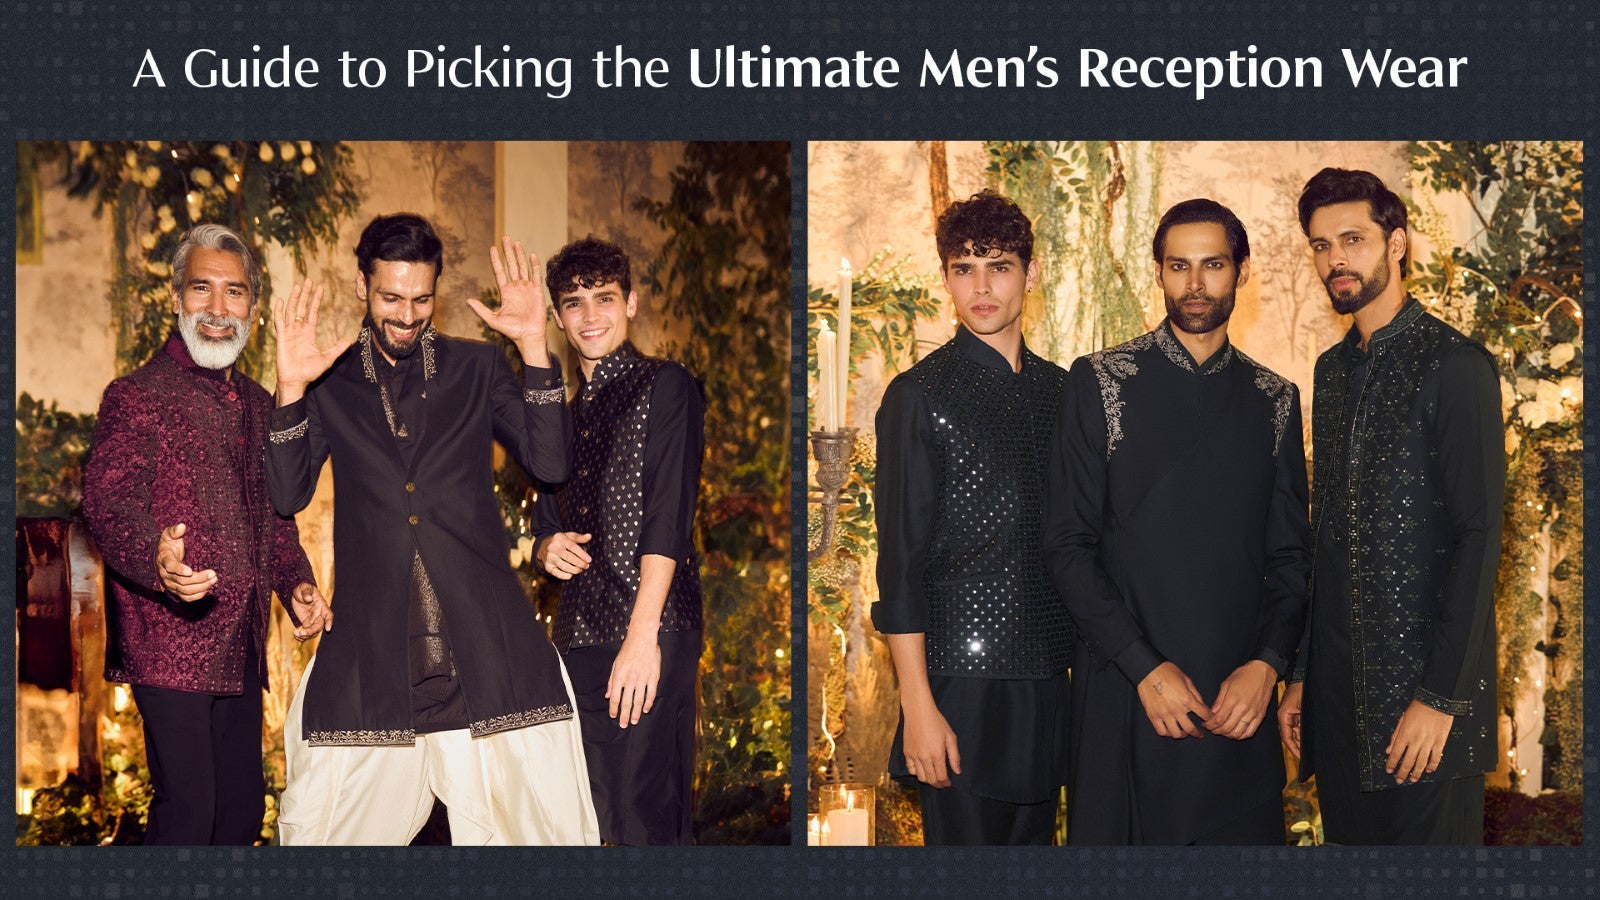 Reception Ready: A Guide to Picking the Ultimate Men's Reception Wear